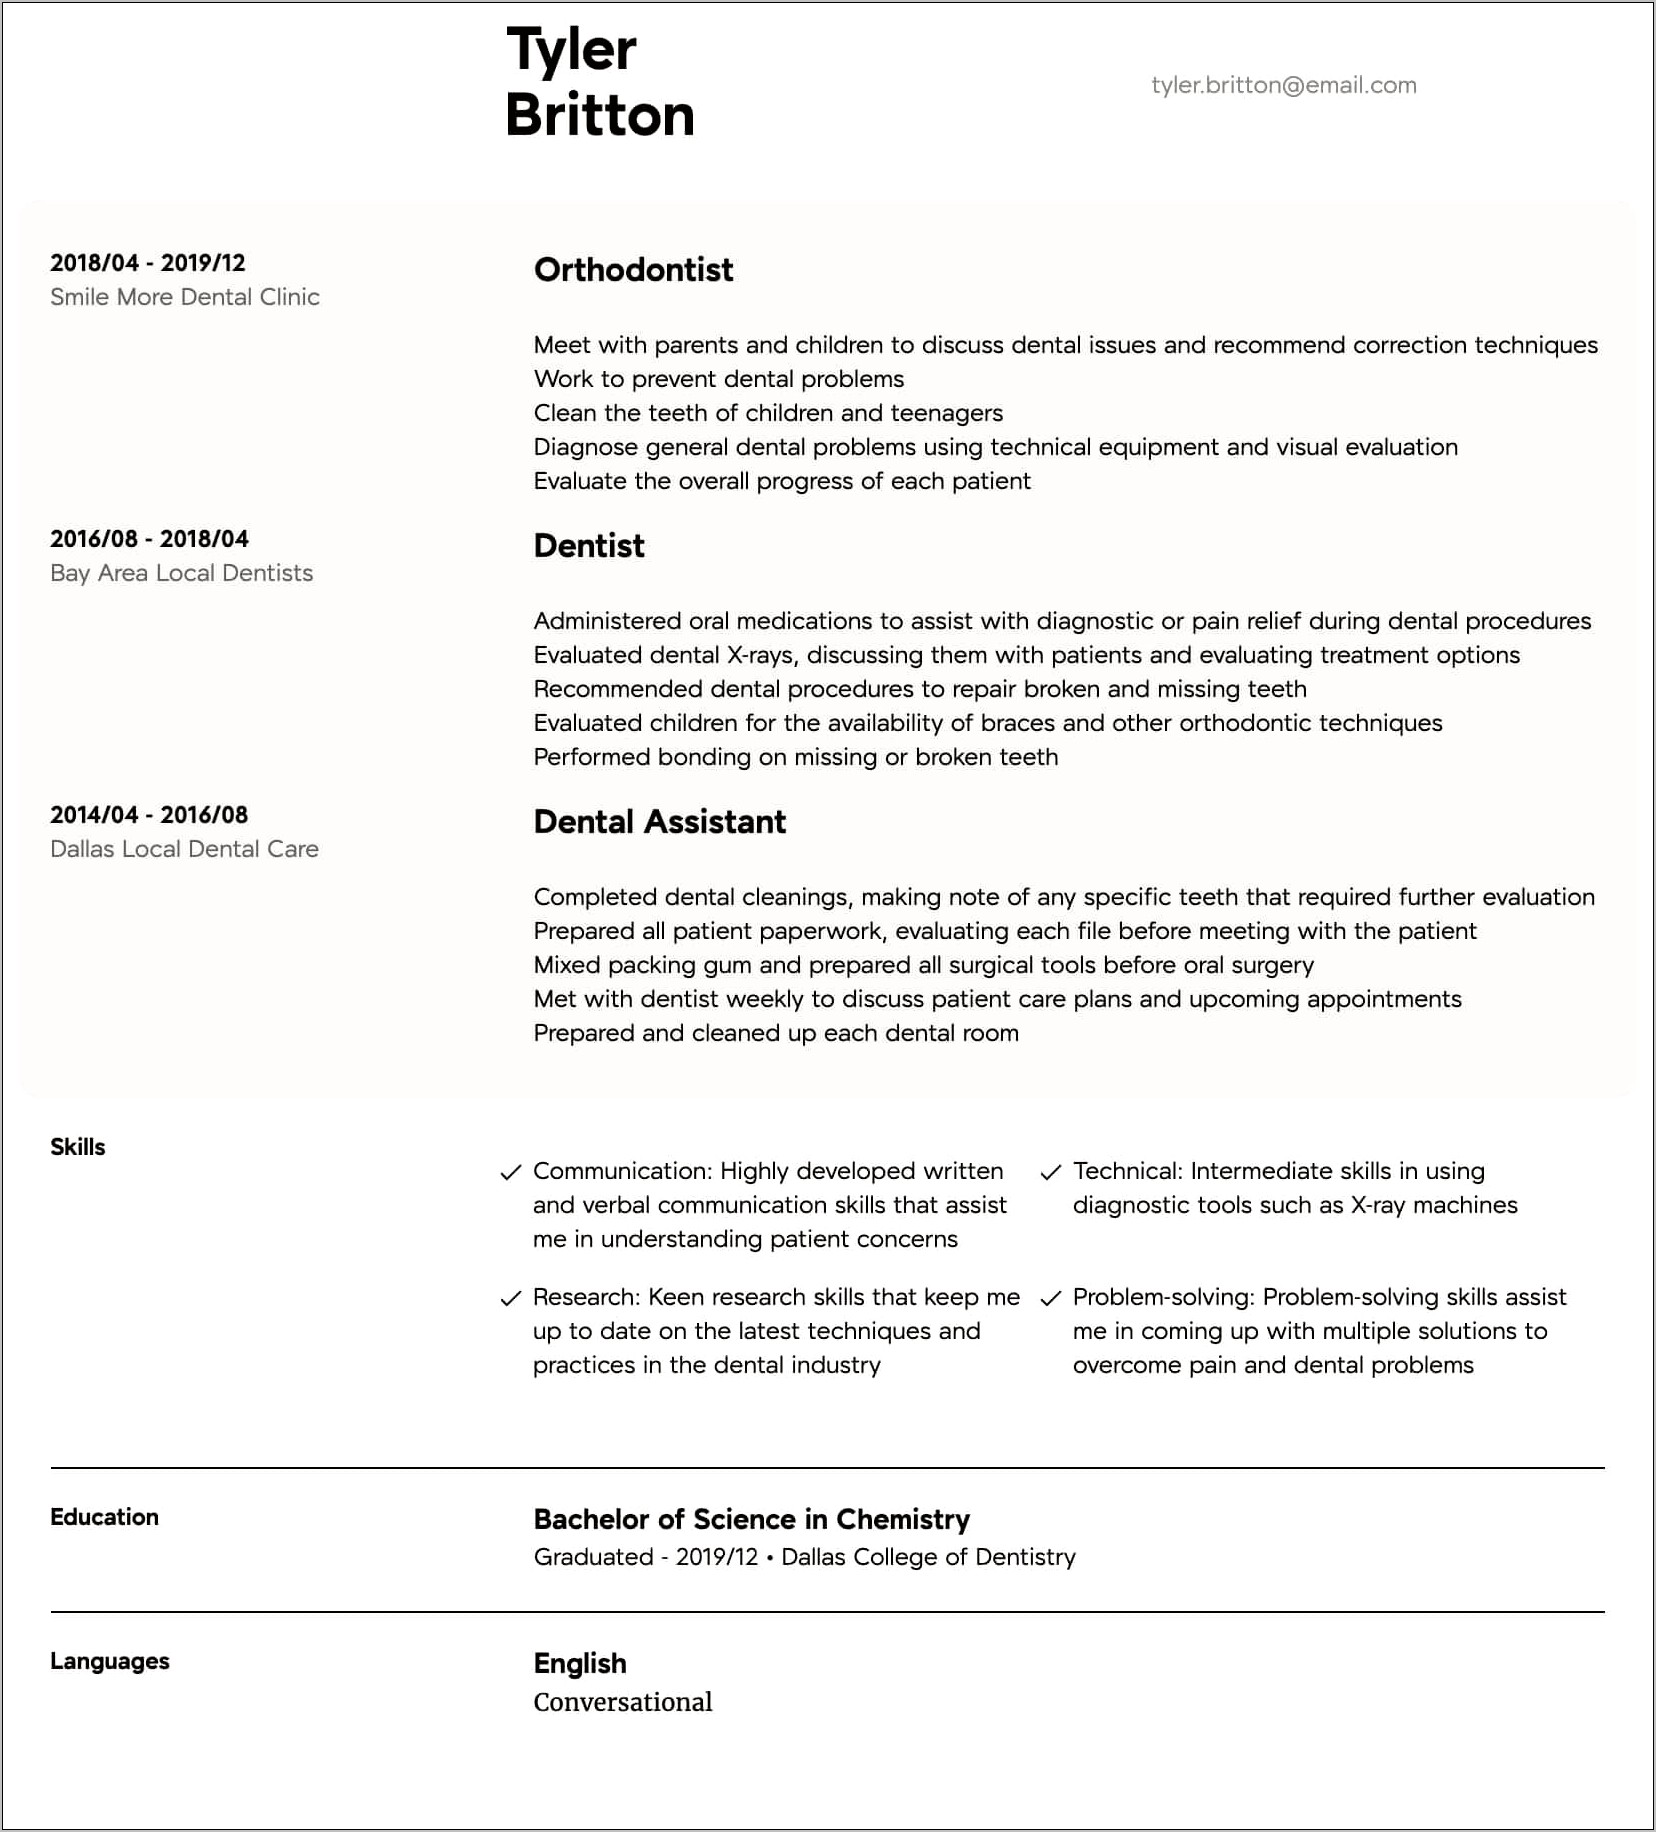 Resume Written And Oral Communication Skills